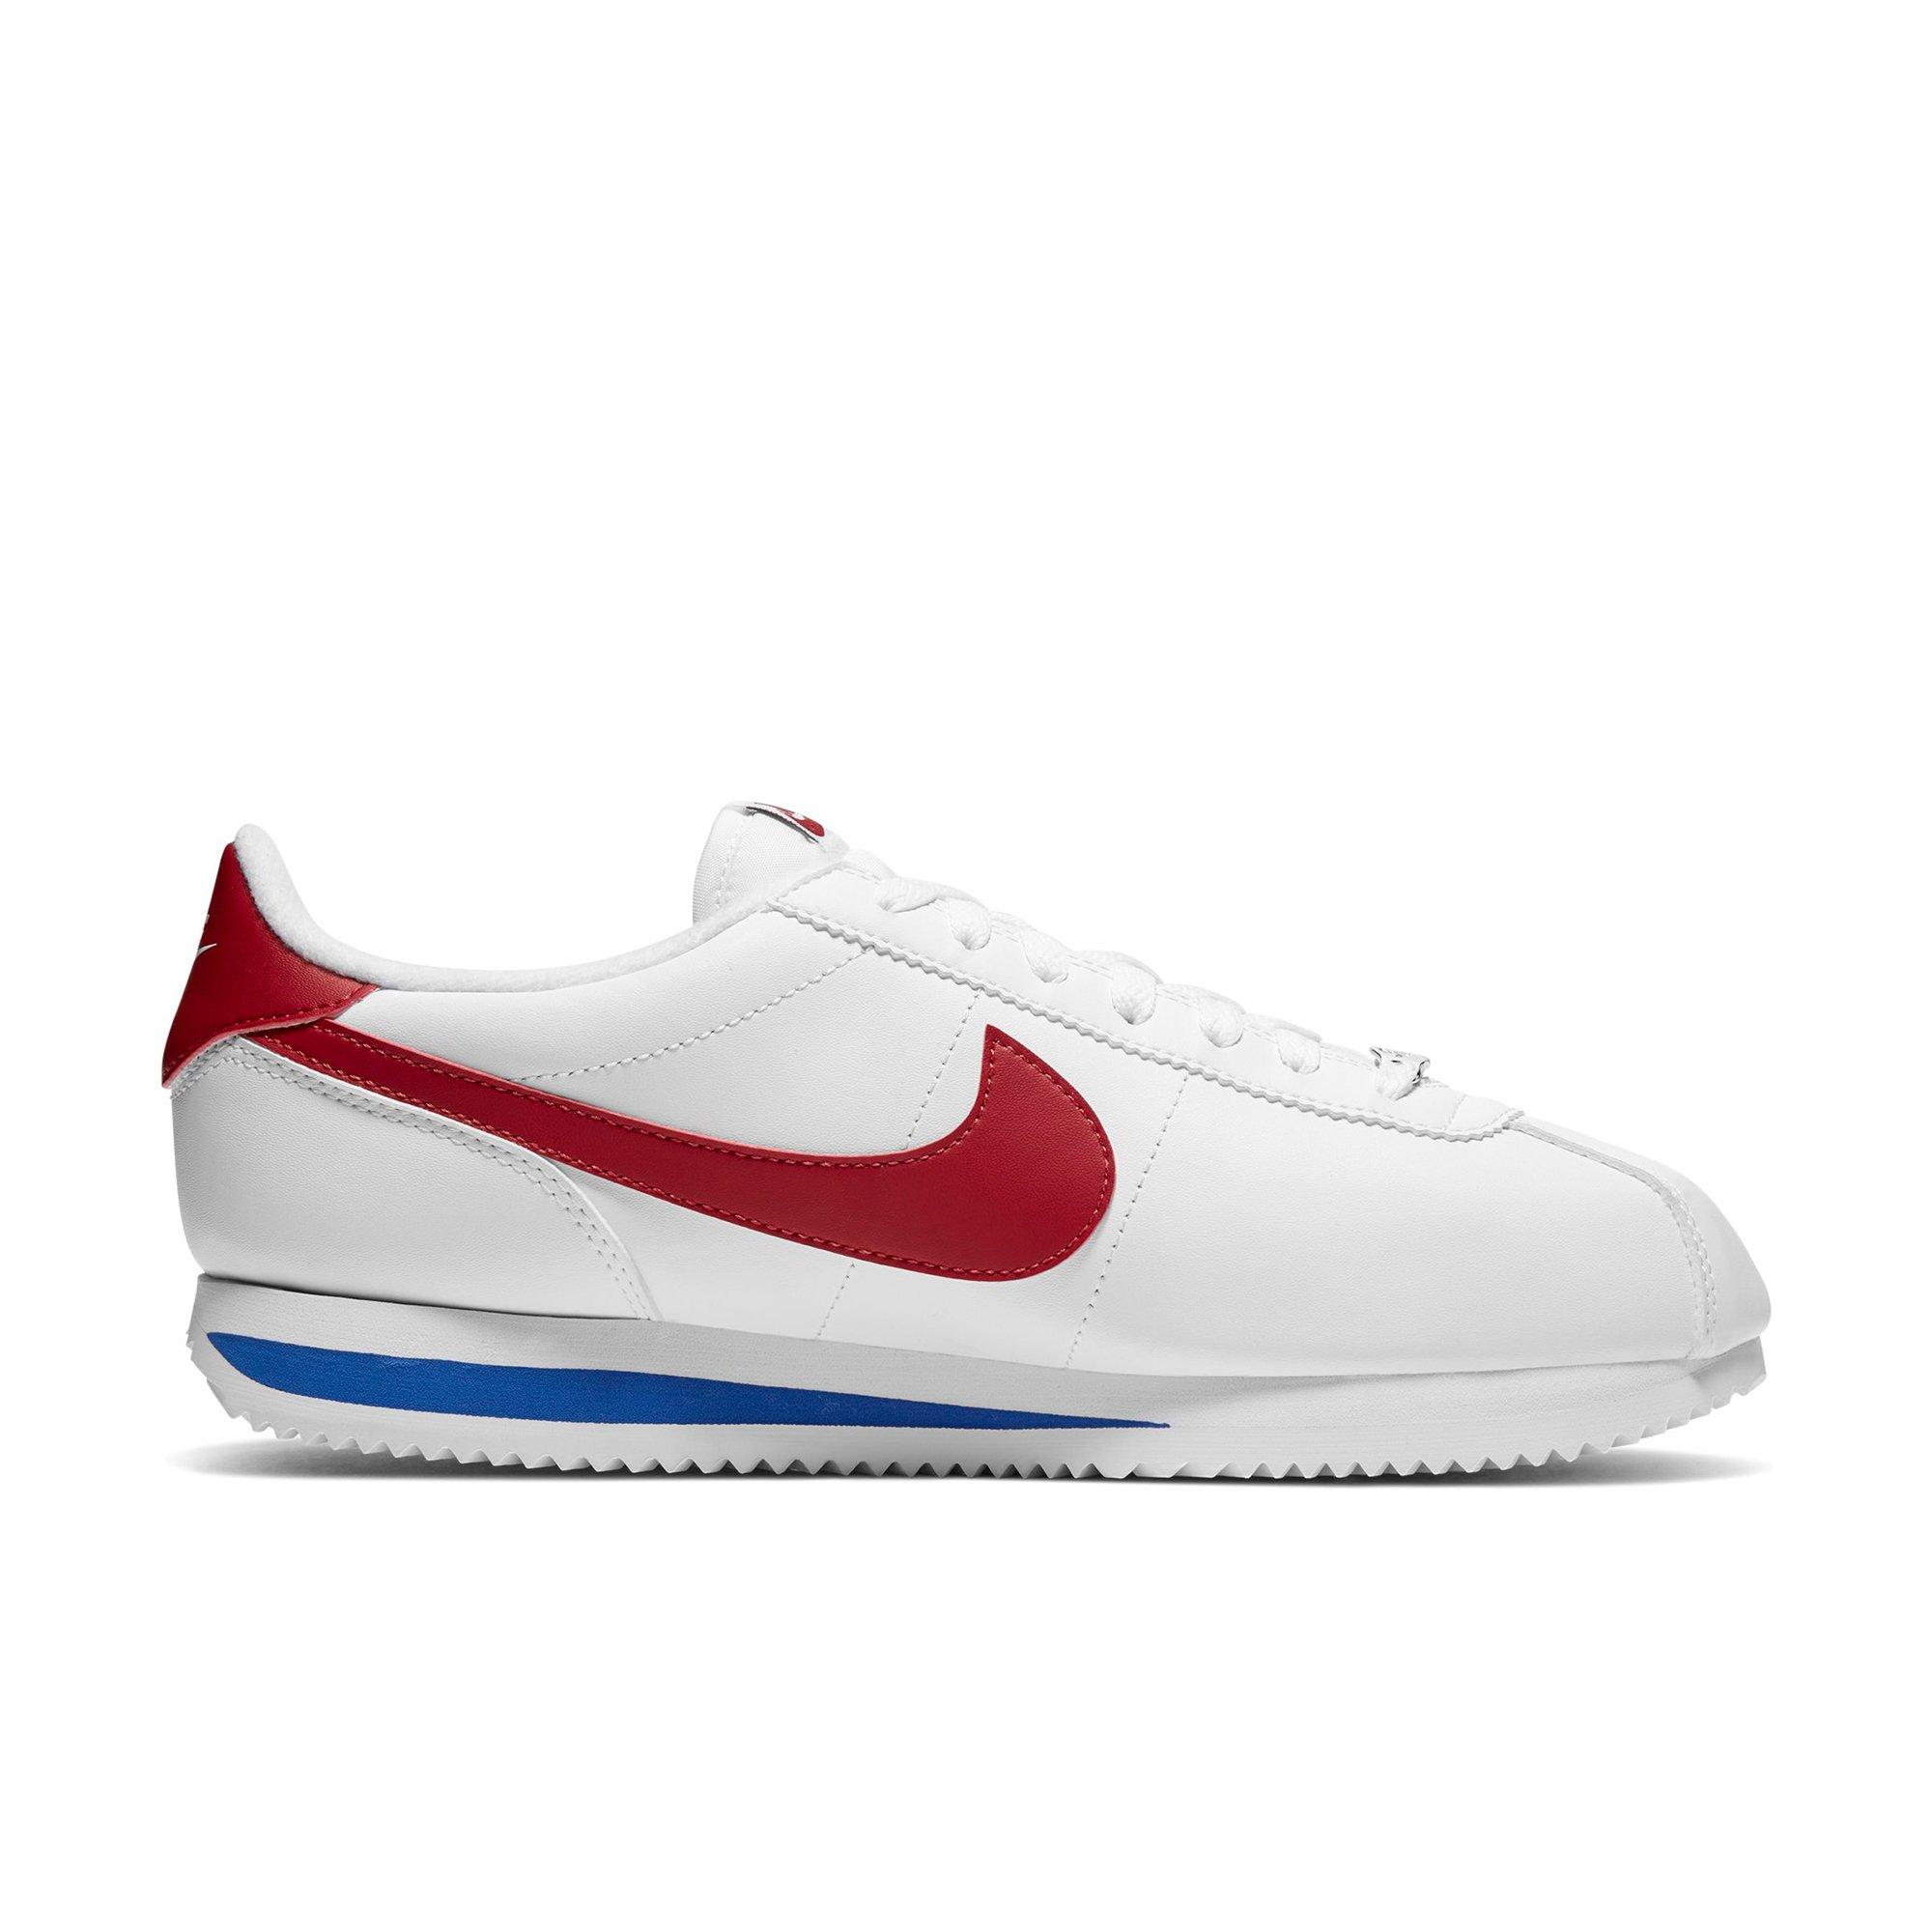 red blue and white cortez